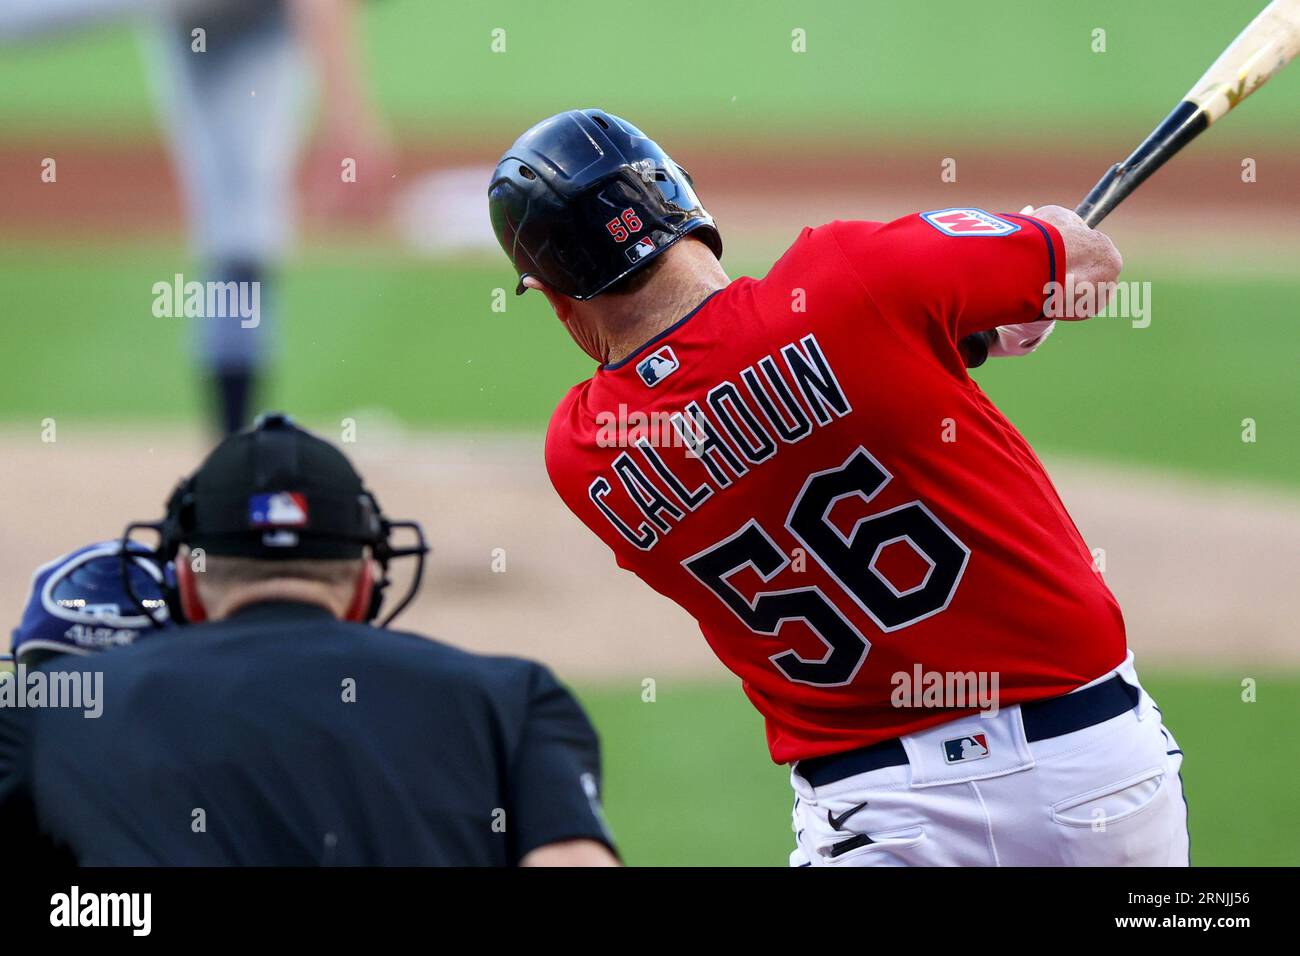 CLEVELAND, OH - AUGUST 06: Cleveland Guardians first baseman Kole Calhoun  (56) doubles during the fifth inning of the Major League Baseball game  between the Chicago White Sox and Cleveland Guardians on